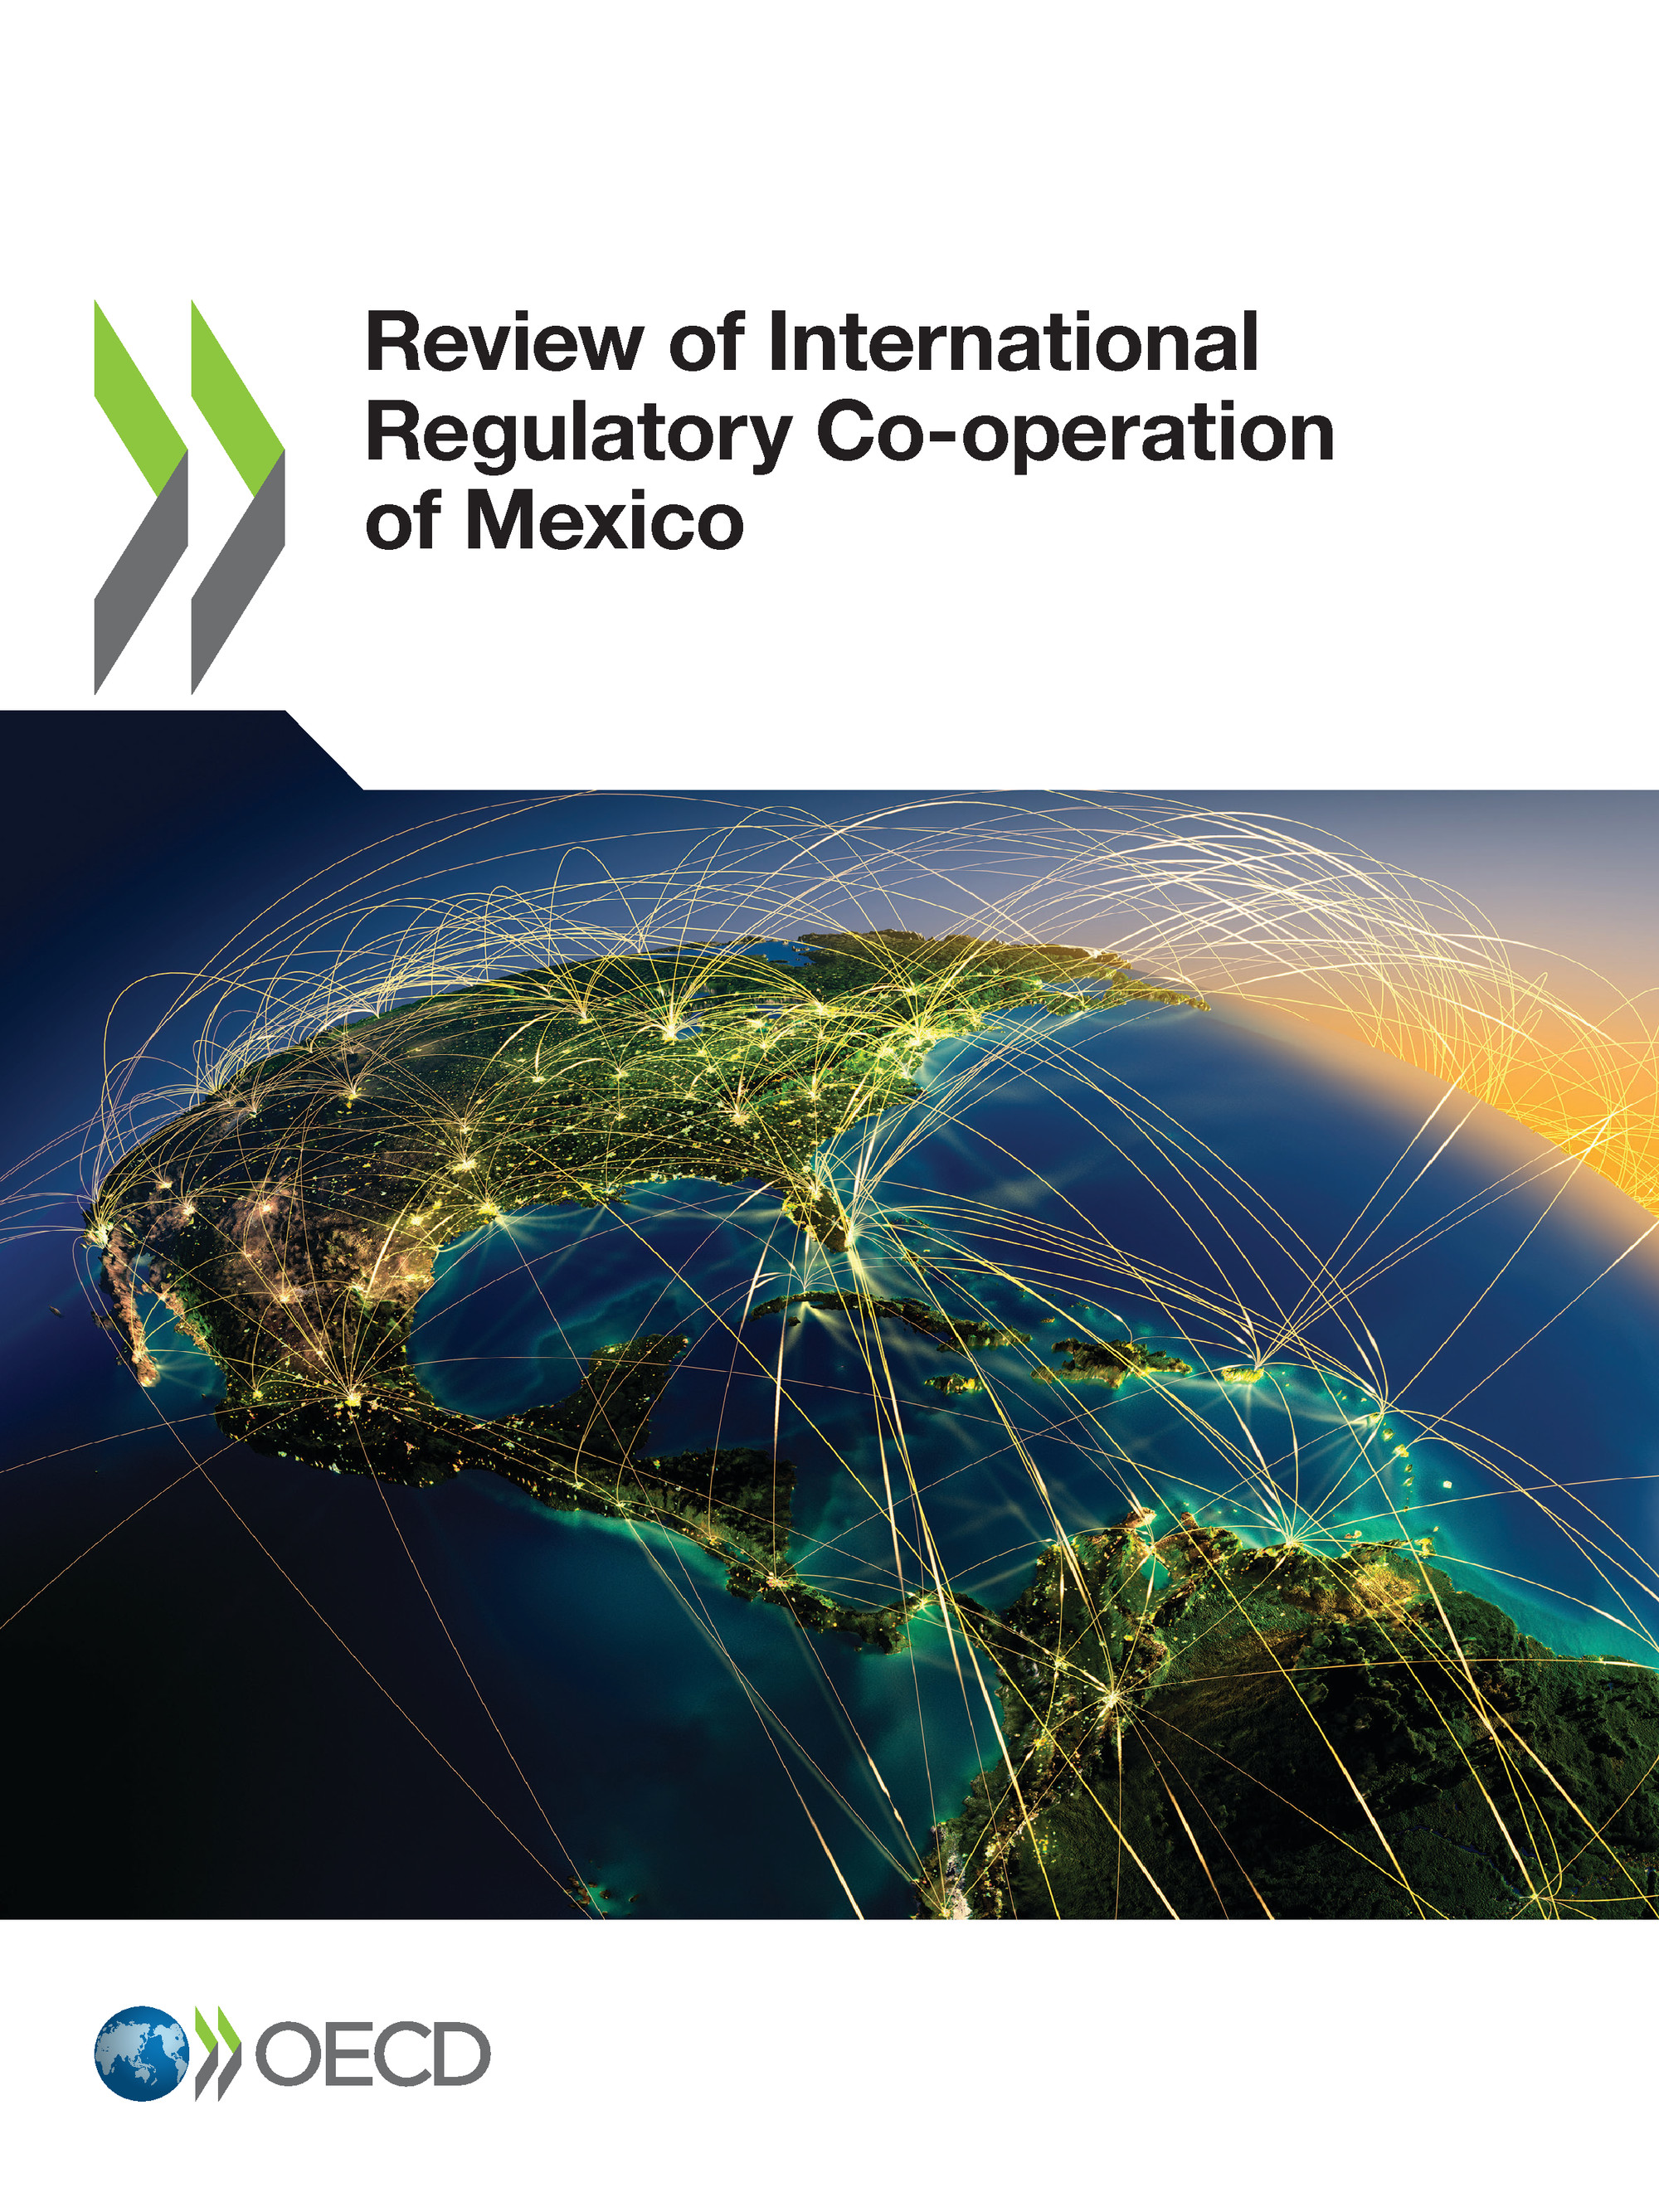 Review of International Regulatory Co-operation of Mexico -  Collectif - OCDE / OECD